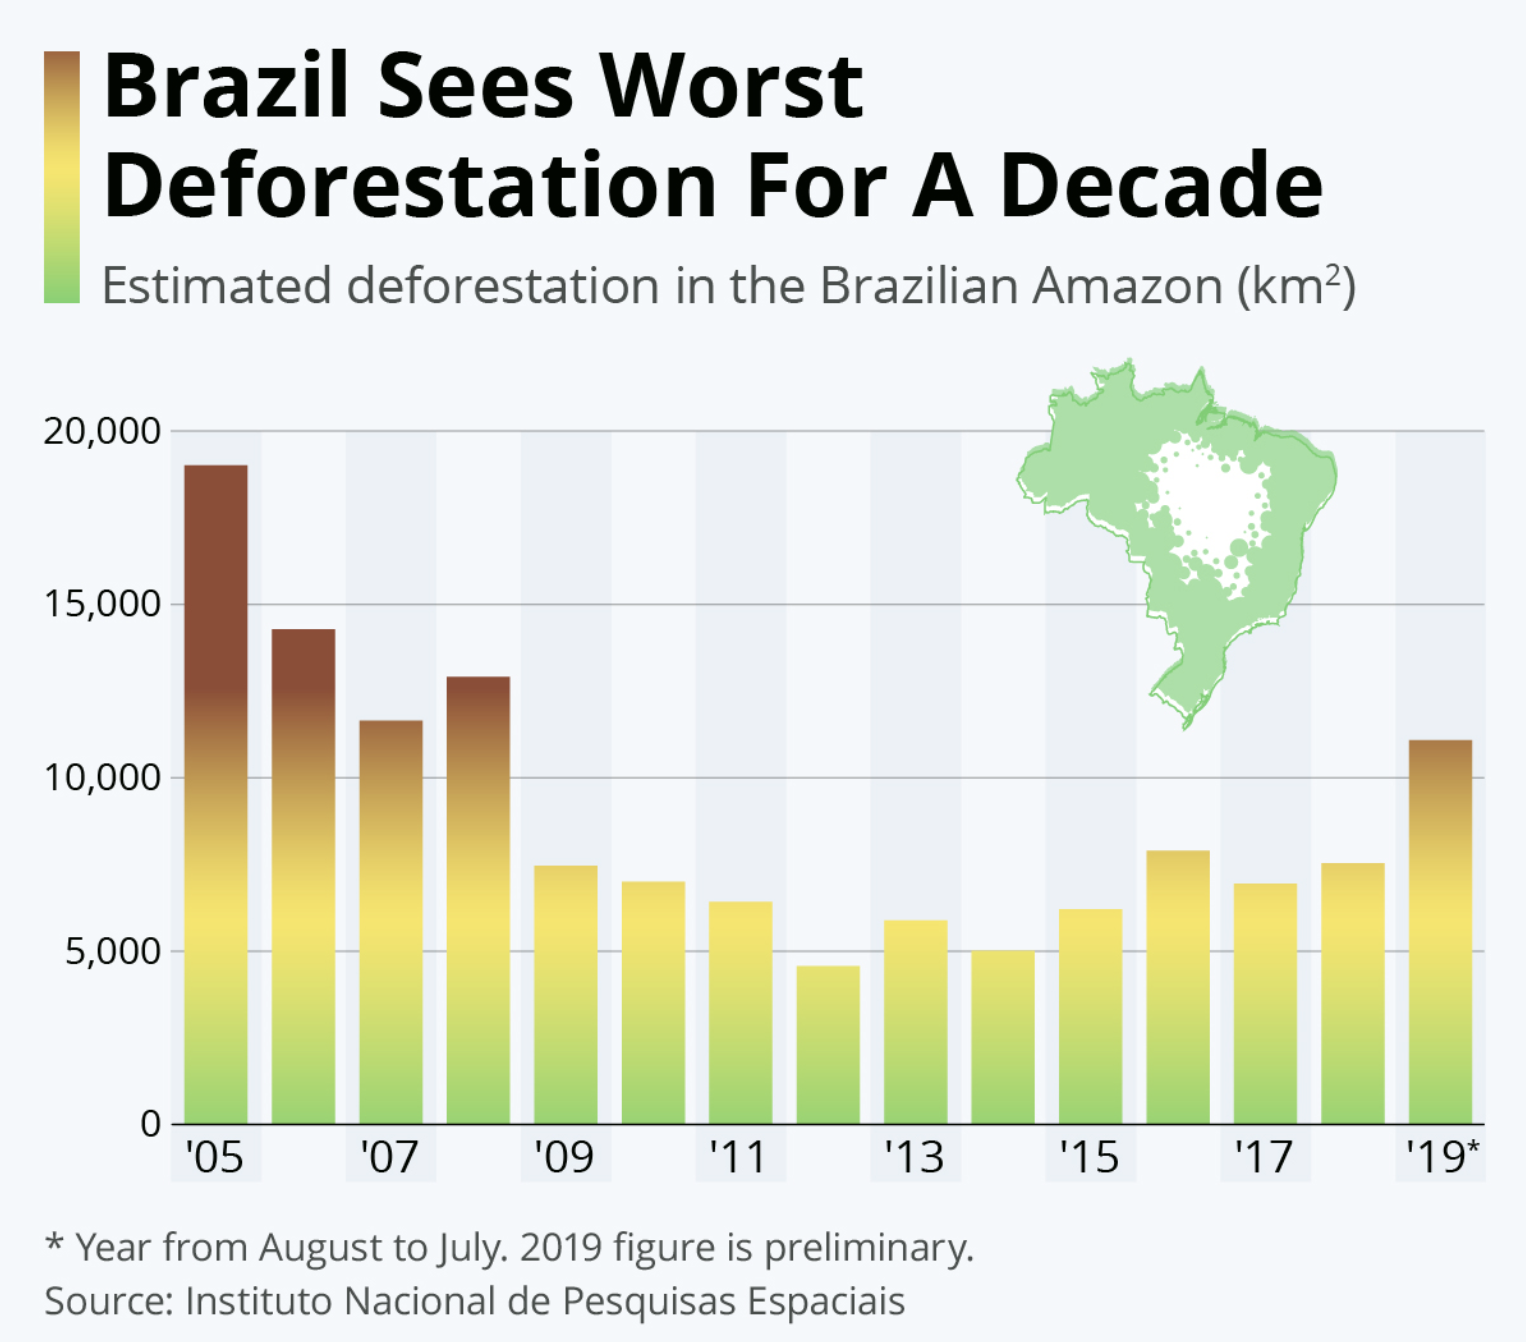 Brazil sees worst deforestation for a decade